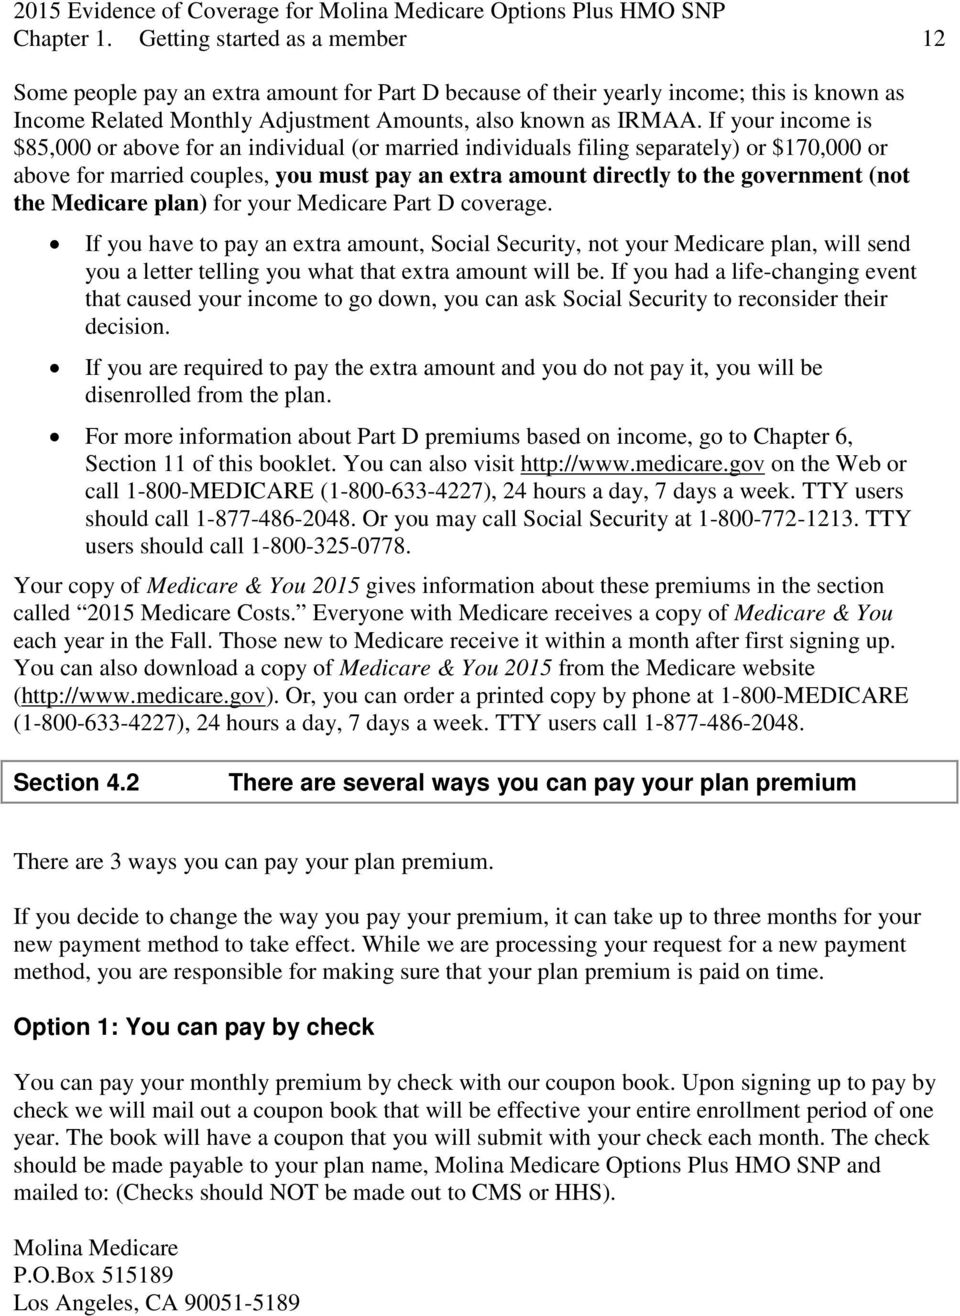 the Medicare plan) for your Medicare Part D coverage. If you have to pay an extra amount, Social Security, not your Medicare plan, will send you a letter telling you what that extra amount will be.